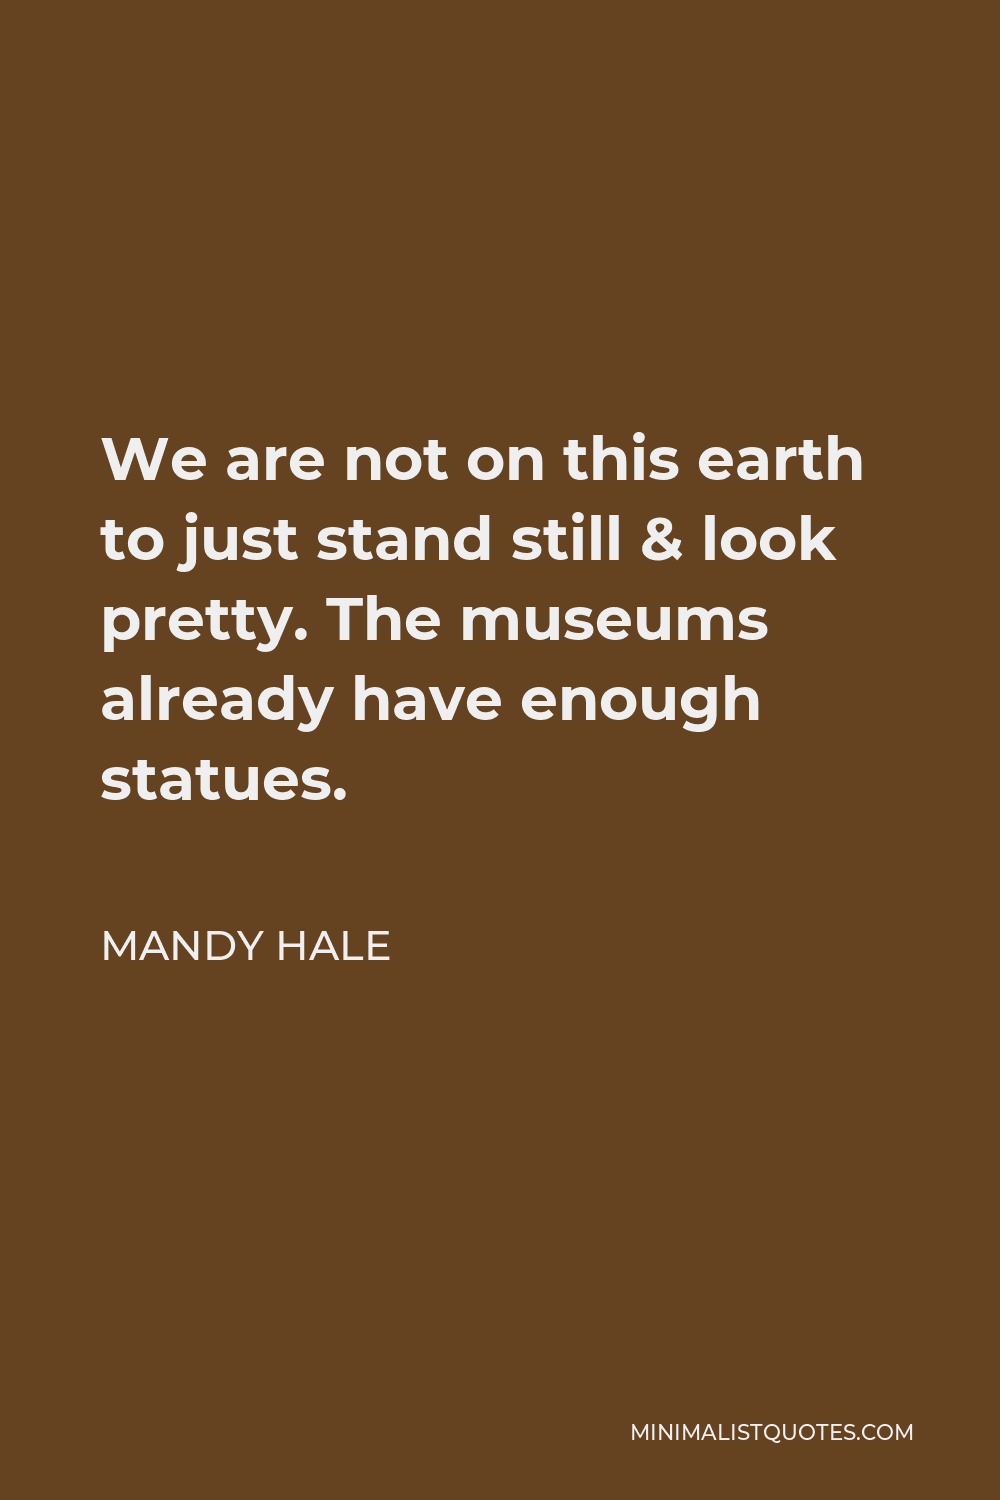 Mandy Hale Quote - We are not on this earth to just stand still & look pretty. The museums already have enough statues.